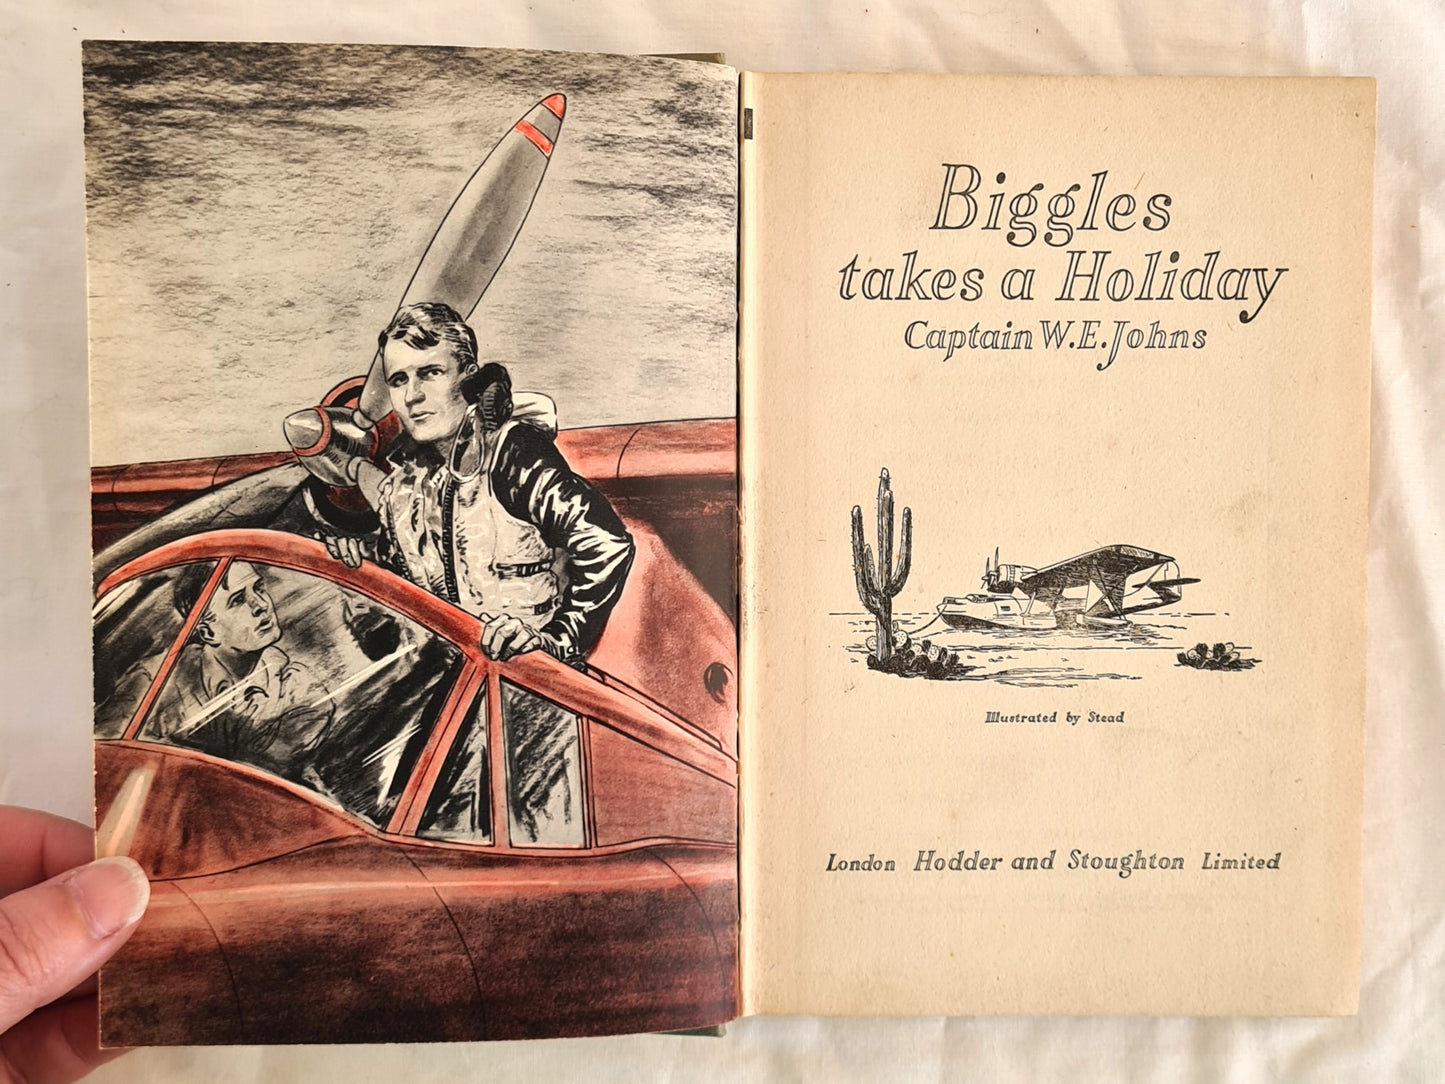 Biggles Takes a Holiday  by Captain W. E. Johns  illustrated by ‘Studio’ Stead